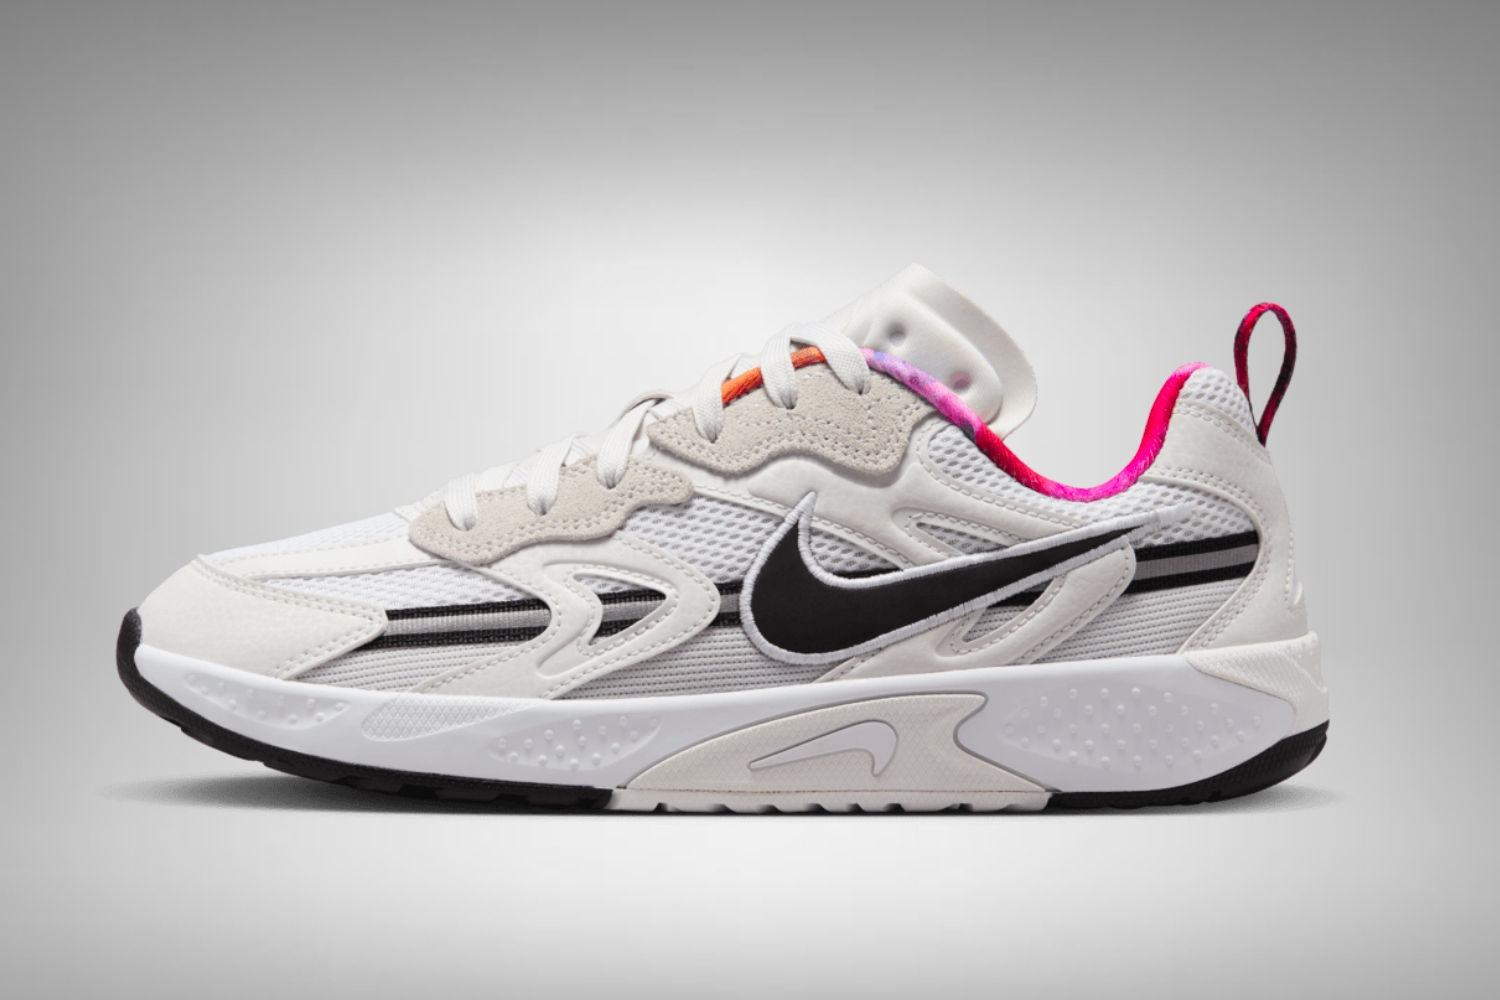 The Nike Jam is getting a Futura makeover